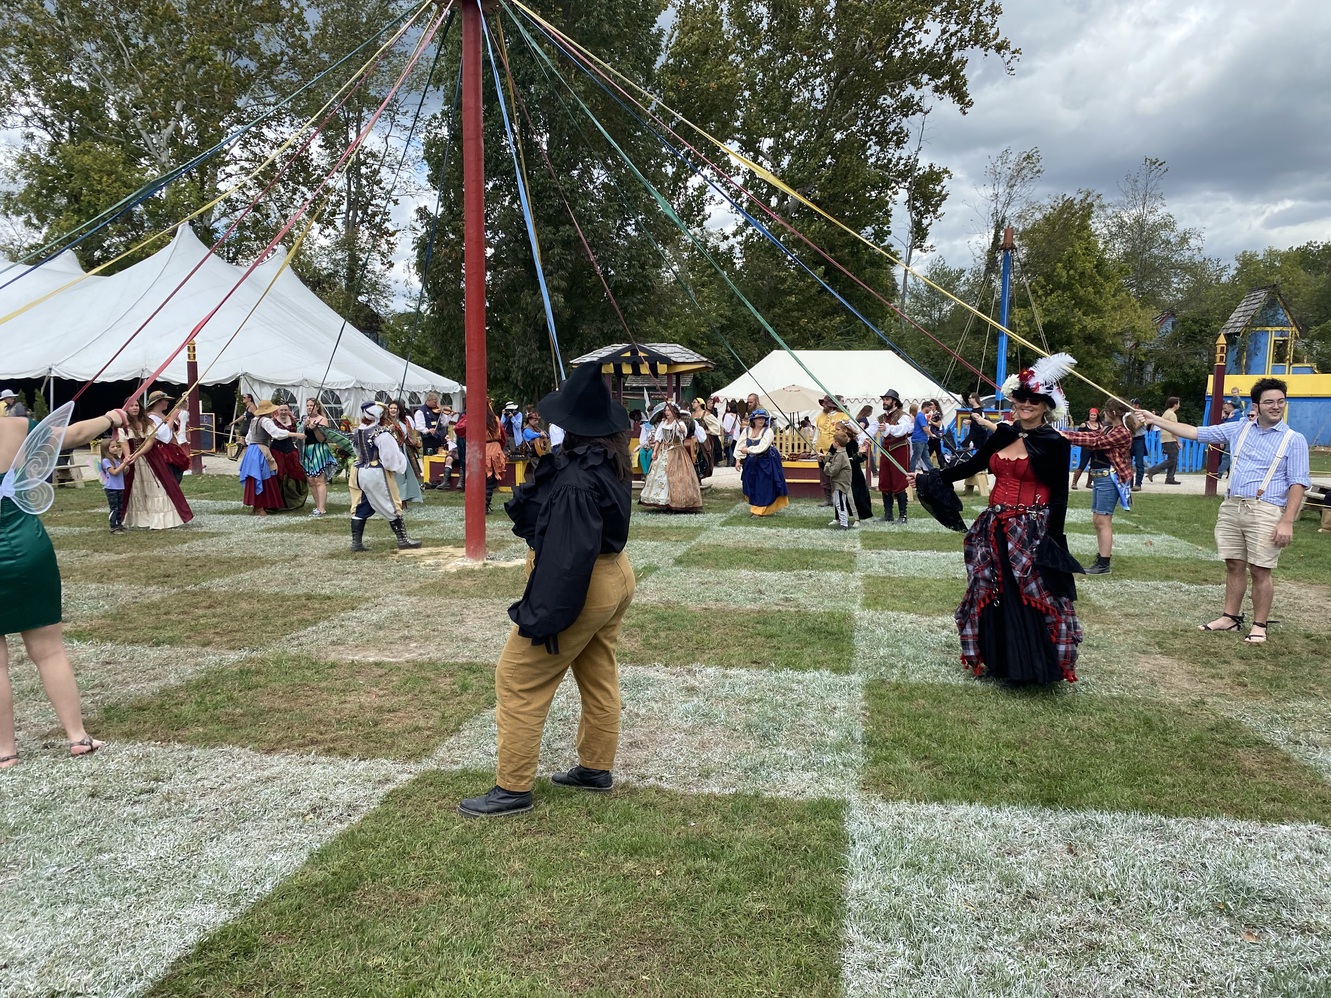 Rally around the Maypole at the festival.